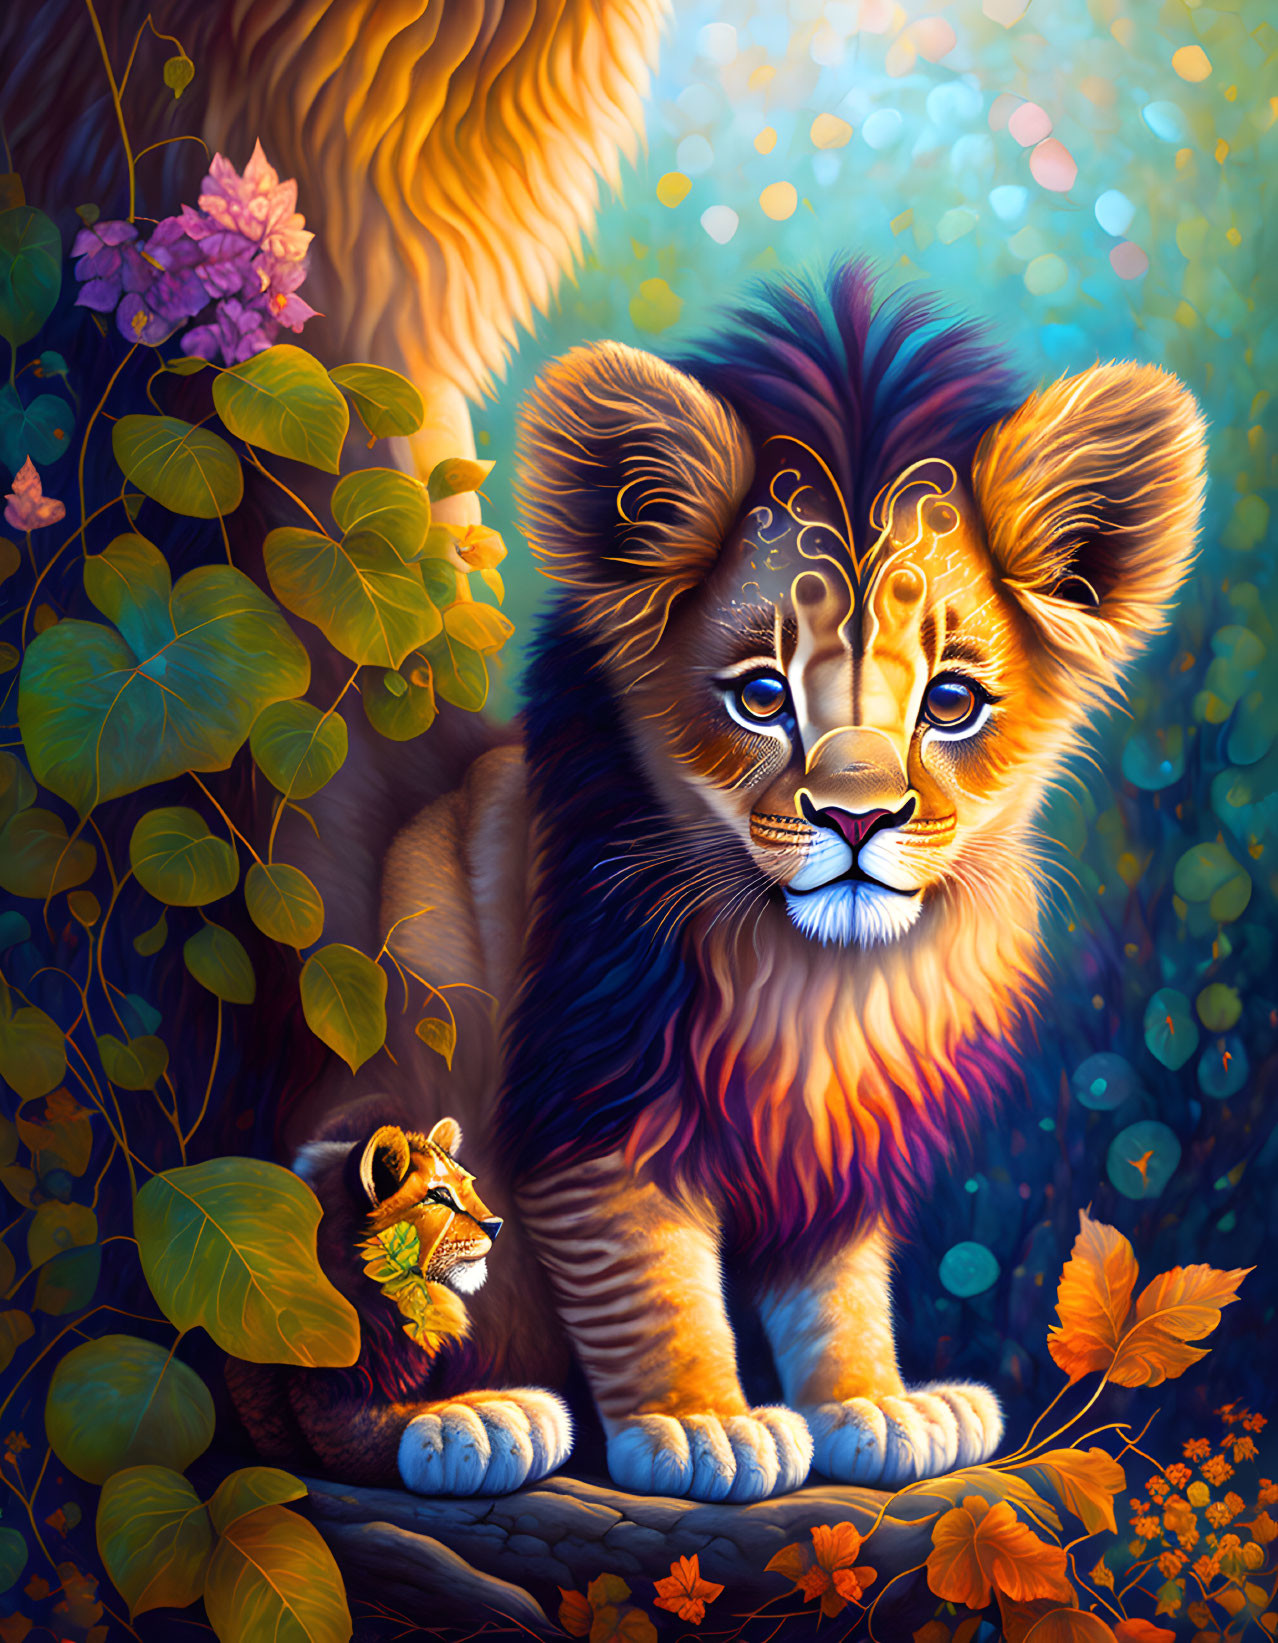 Colorful illustration: young lion and duckling in enchanted forest